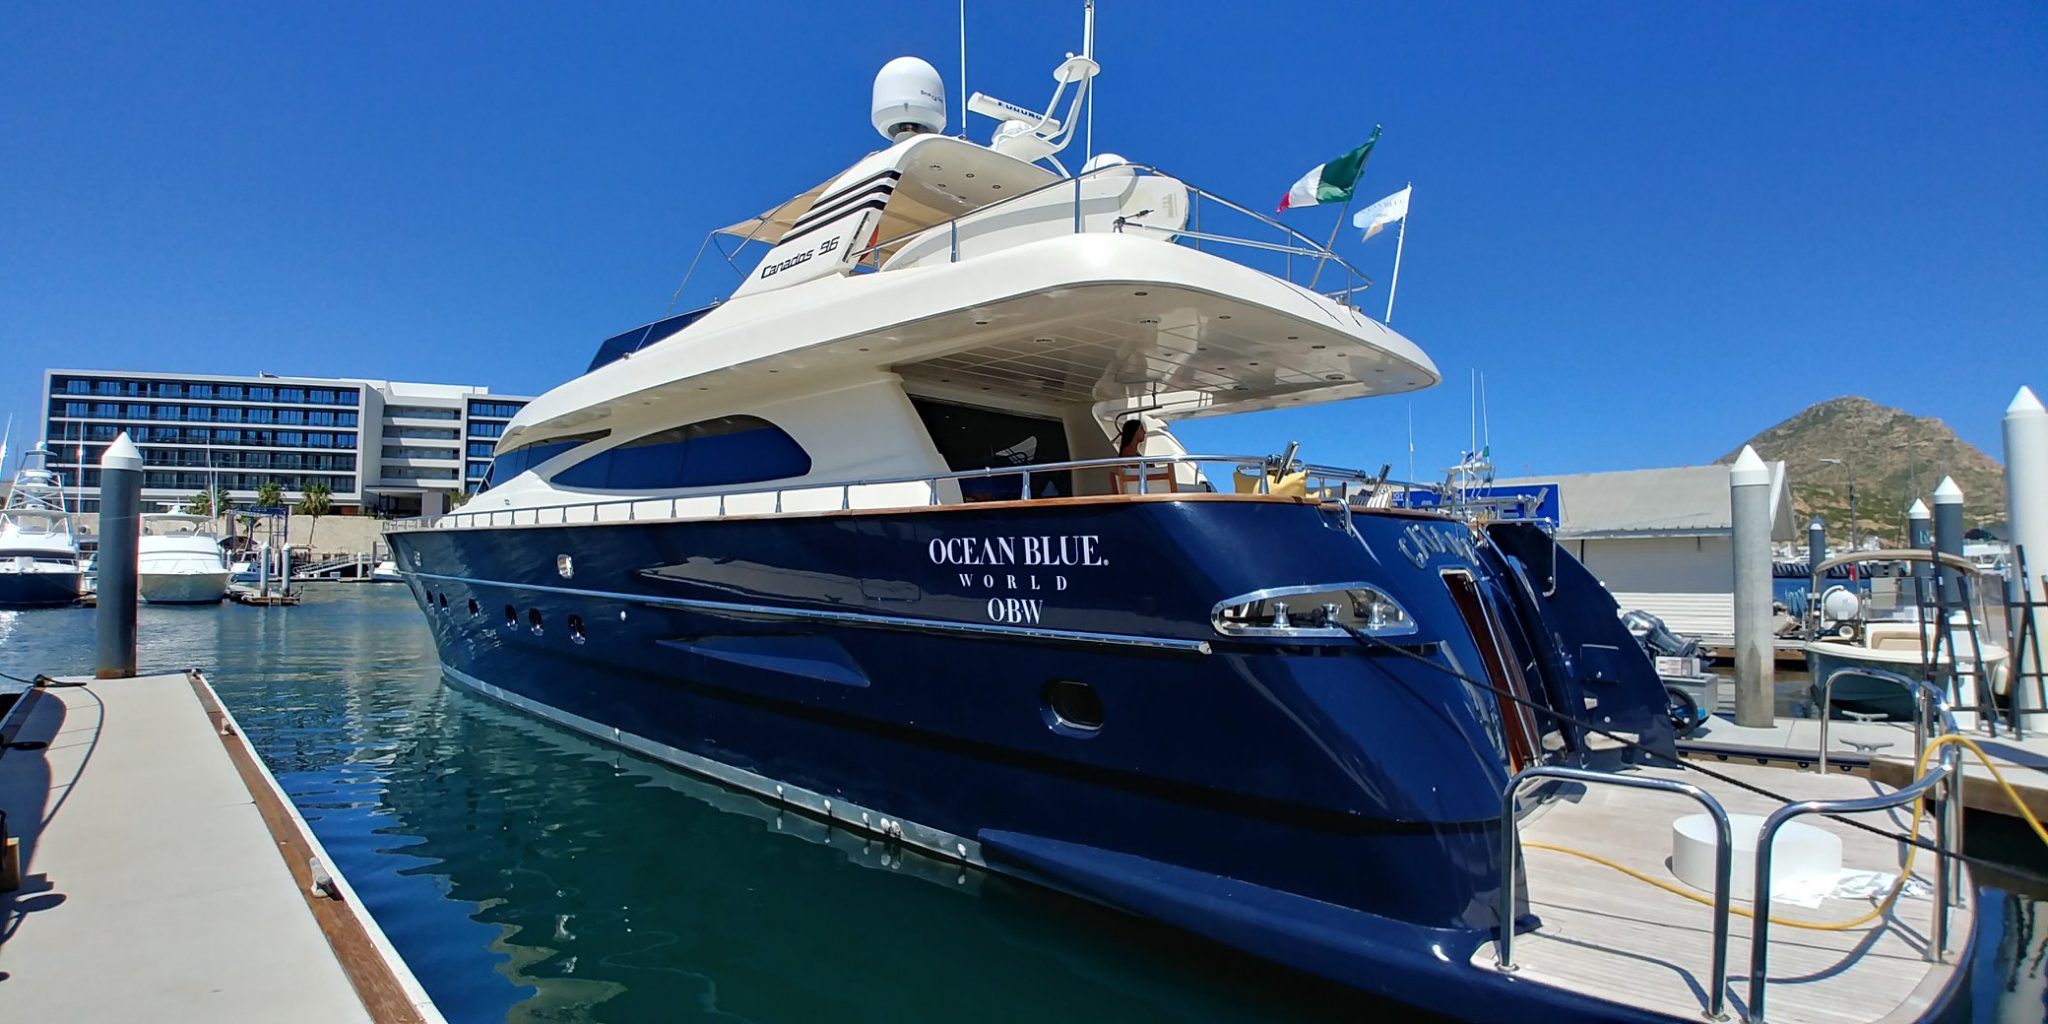 OCEAN BLUE WORLD LAUNCHES NEW PRODUCTIONS DIVISION DEBUTING WITH A #BYINVITATIONONLY YACHT EXPERIENCE